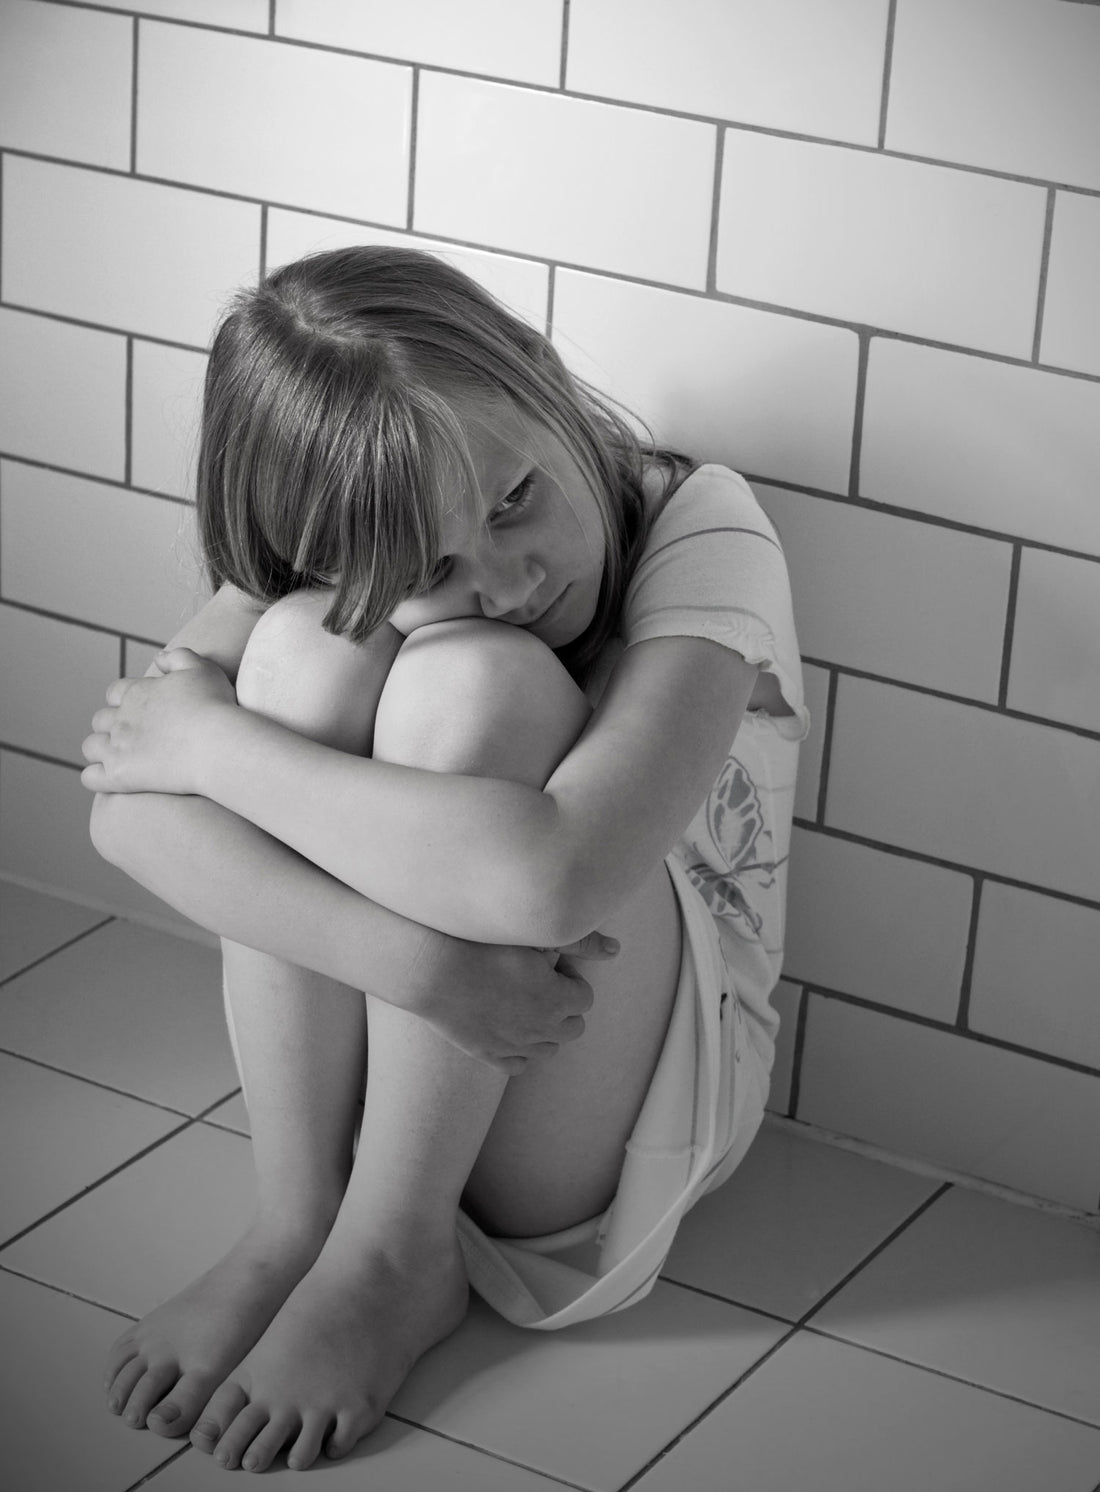 Reassurance After a Child has Disclosed Sexual Abuse